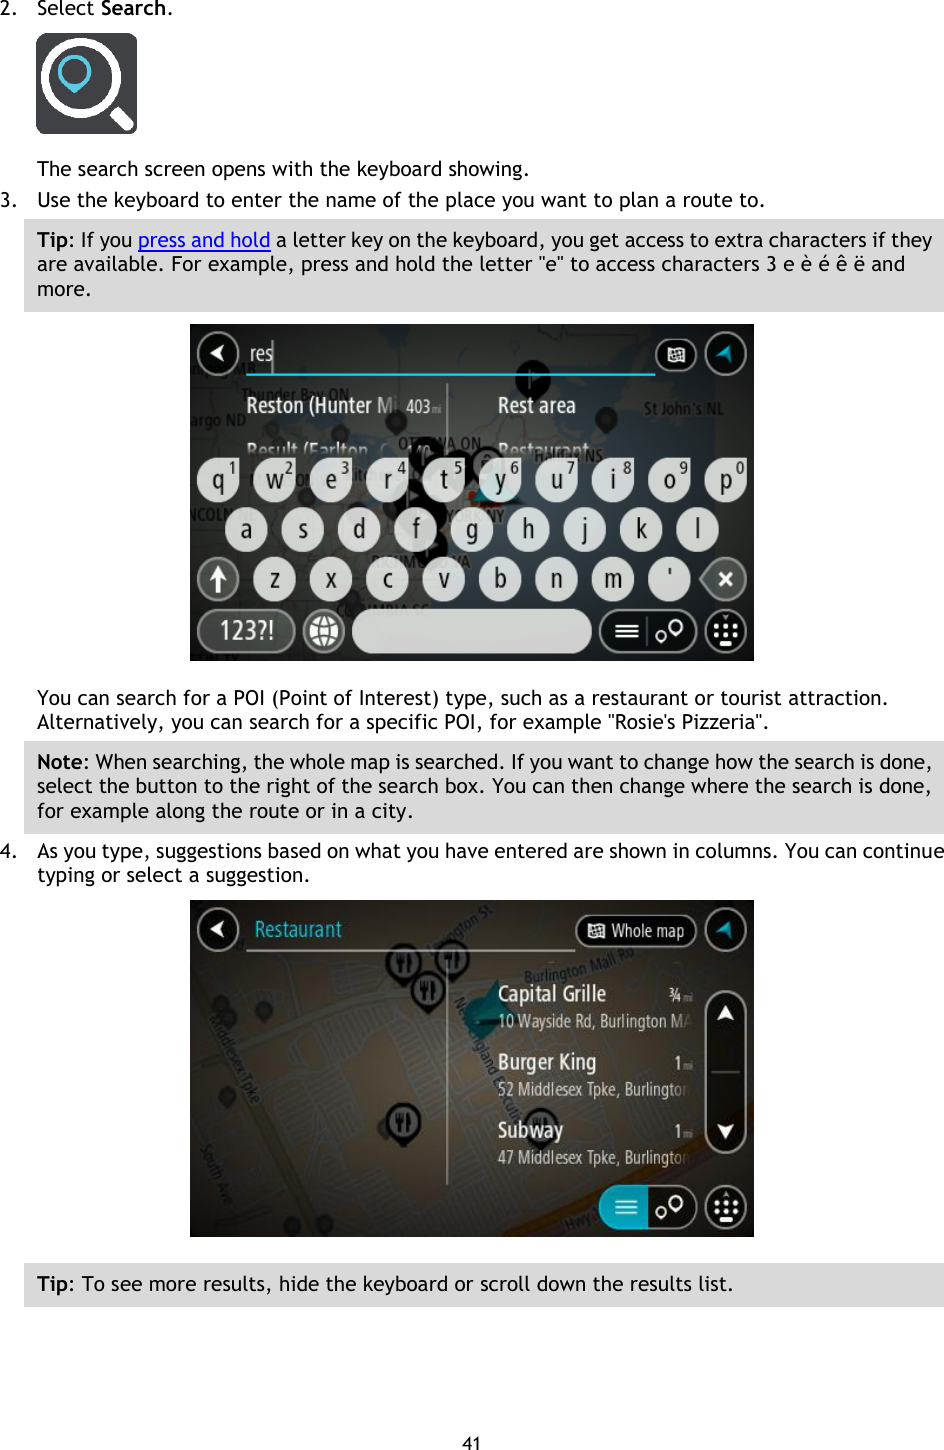 41    2. Select Search.  The search screen opens with the keyboard showing. 3. Use the keyboard to enter the name of the place you want to plan a route to. Tip: If you press and hold a letter key on the keyboard, you get access to extra characters if they are available. For example, press and hold the letter &quot;e&quot; to access characters 3 e è é ê ë and more.  You can search for a POI (Point of Interest) type, such as a restaurant or tourist attraction. Alternatively, you can search for a specific POI, for example &quot;Rosie&apos;s Pizzeria&quot;. Note: When searching, the whole map is searched. If you want to change how the search is done, select the button to the right of the search box. You can then change where the search is done, for example along the route or in a city. 4. As you type, suggestions based on what you have entered are shown in columns. You can continue typing or select a suggestion.  Tip: To see more results, hide the keyboard or scroll down the results list. 